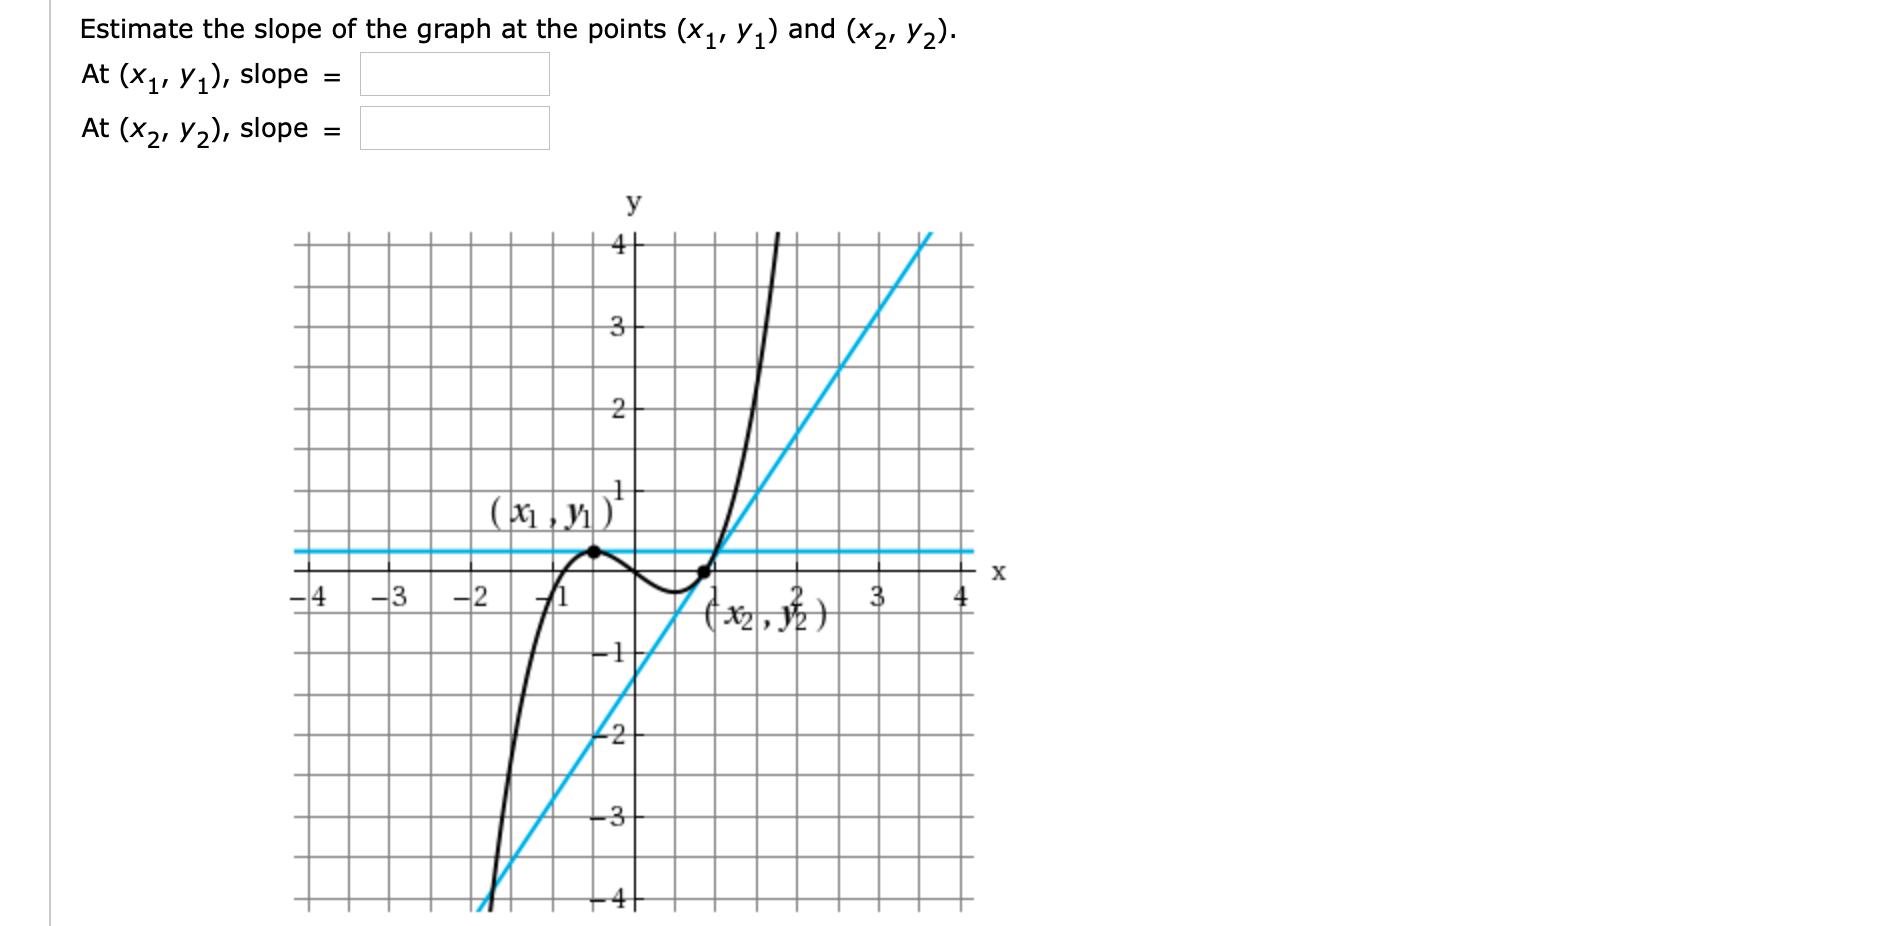 Estimate the slope of the graph at the points (x,, y,) and (x2, Y2).
At (x1, Y1), slope
At (x2, Y2), slope
y
3
(1 , yn )"
X
-4
-3
-2
